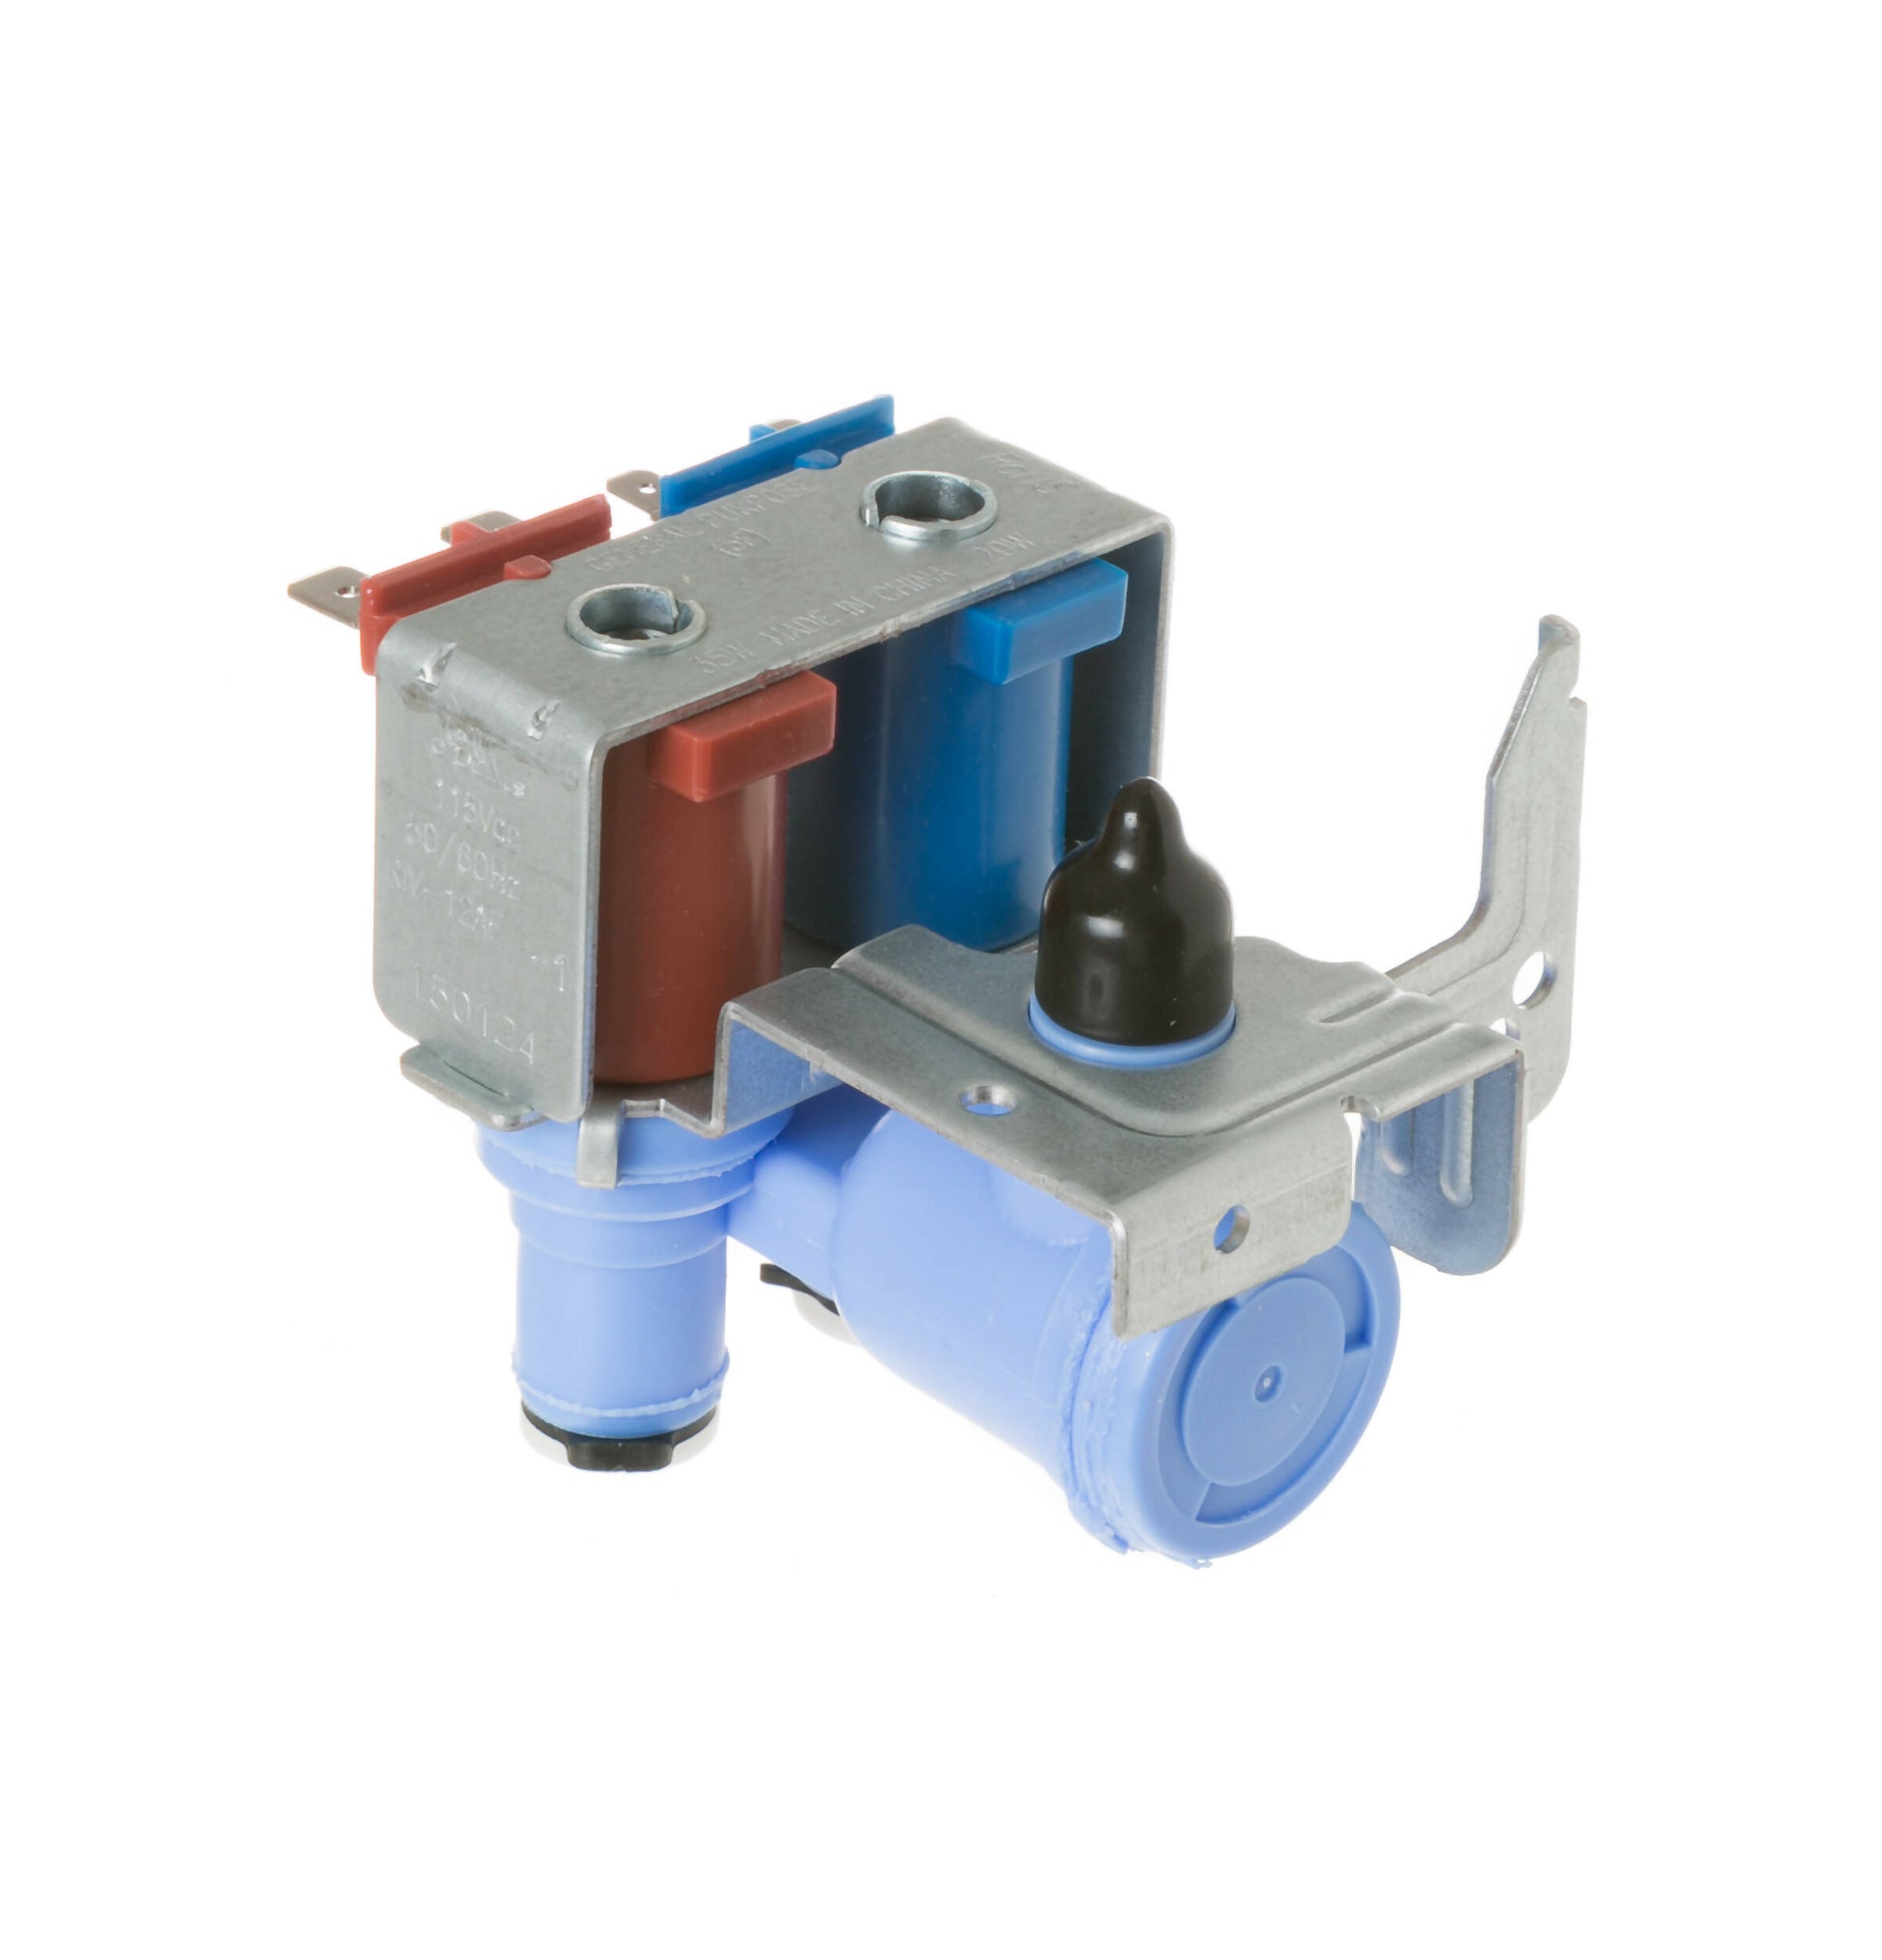 Water Inlet Valve - 00615235, Replaces: PD00026525 615235 OEM PARTS WORLD